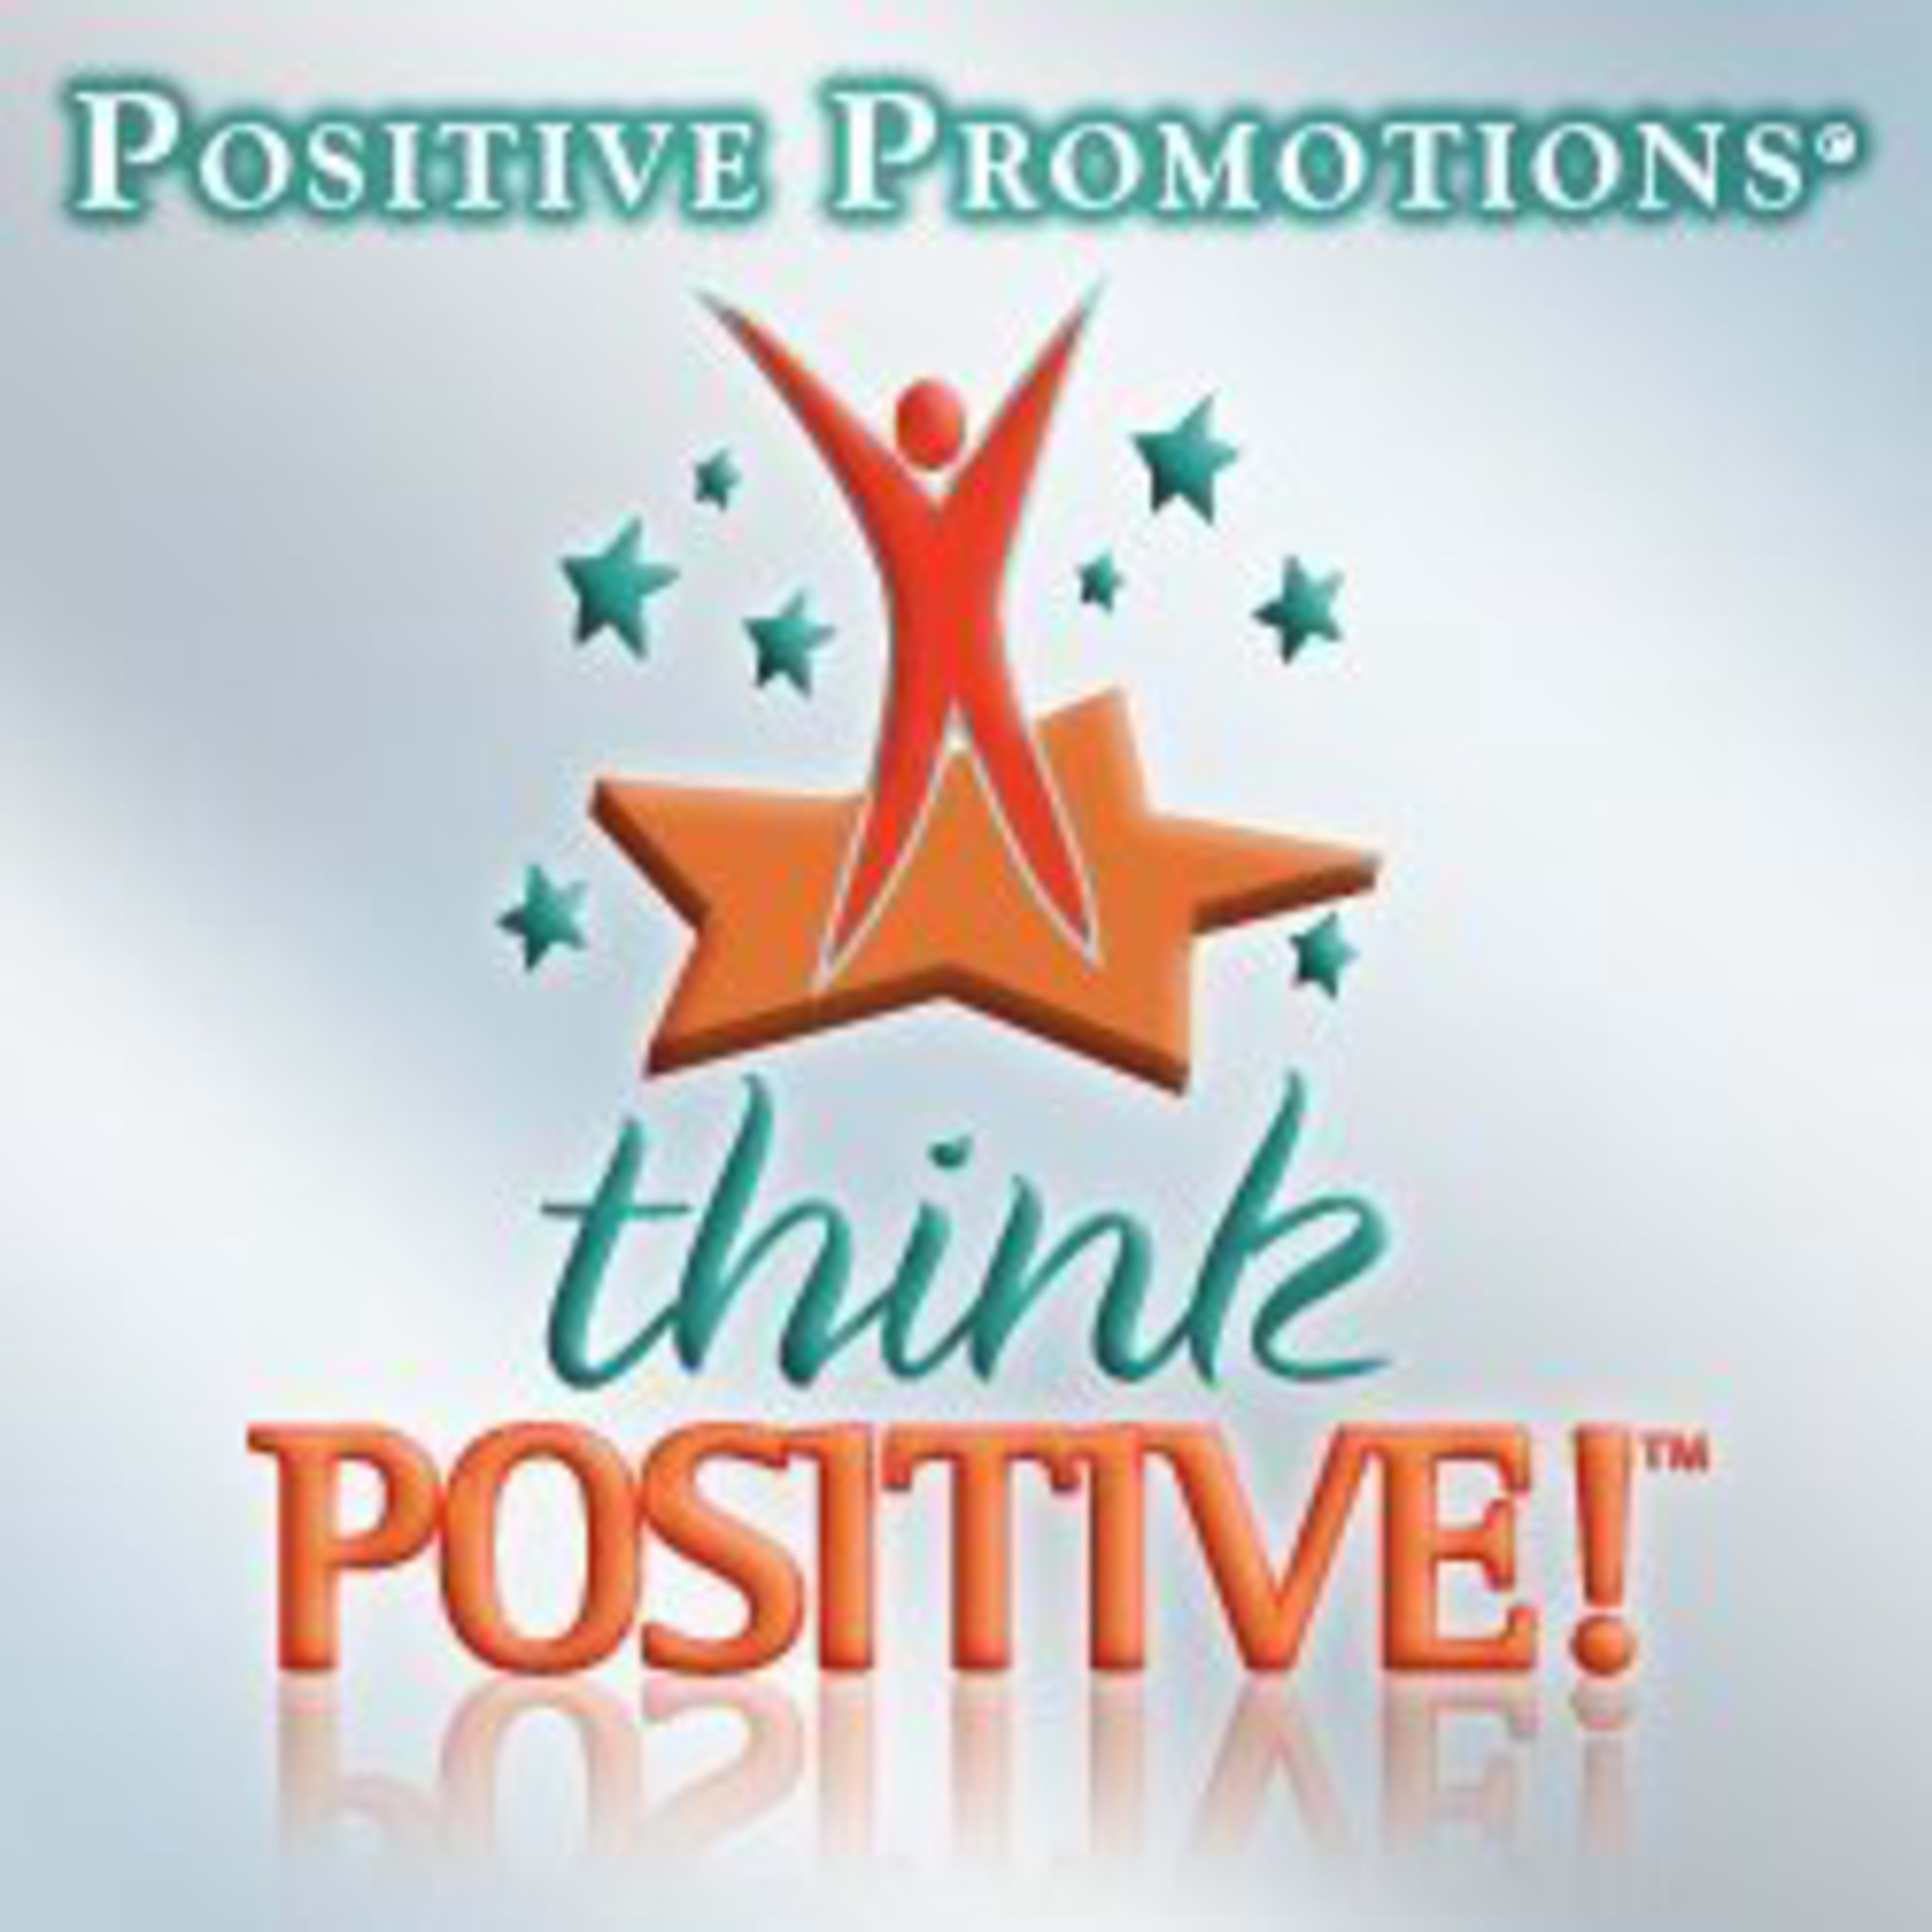 Positive Promotions Code